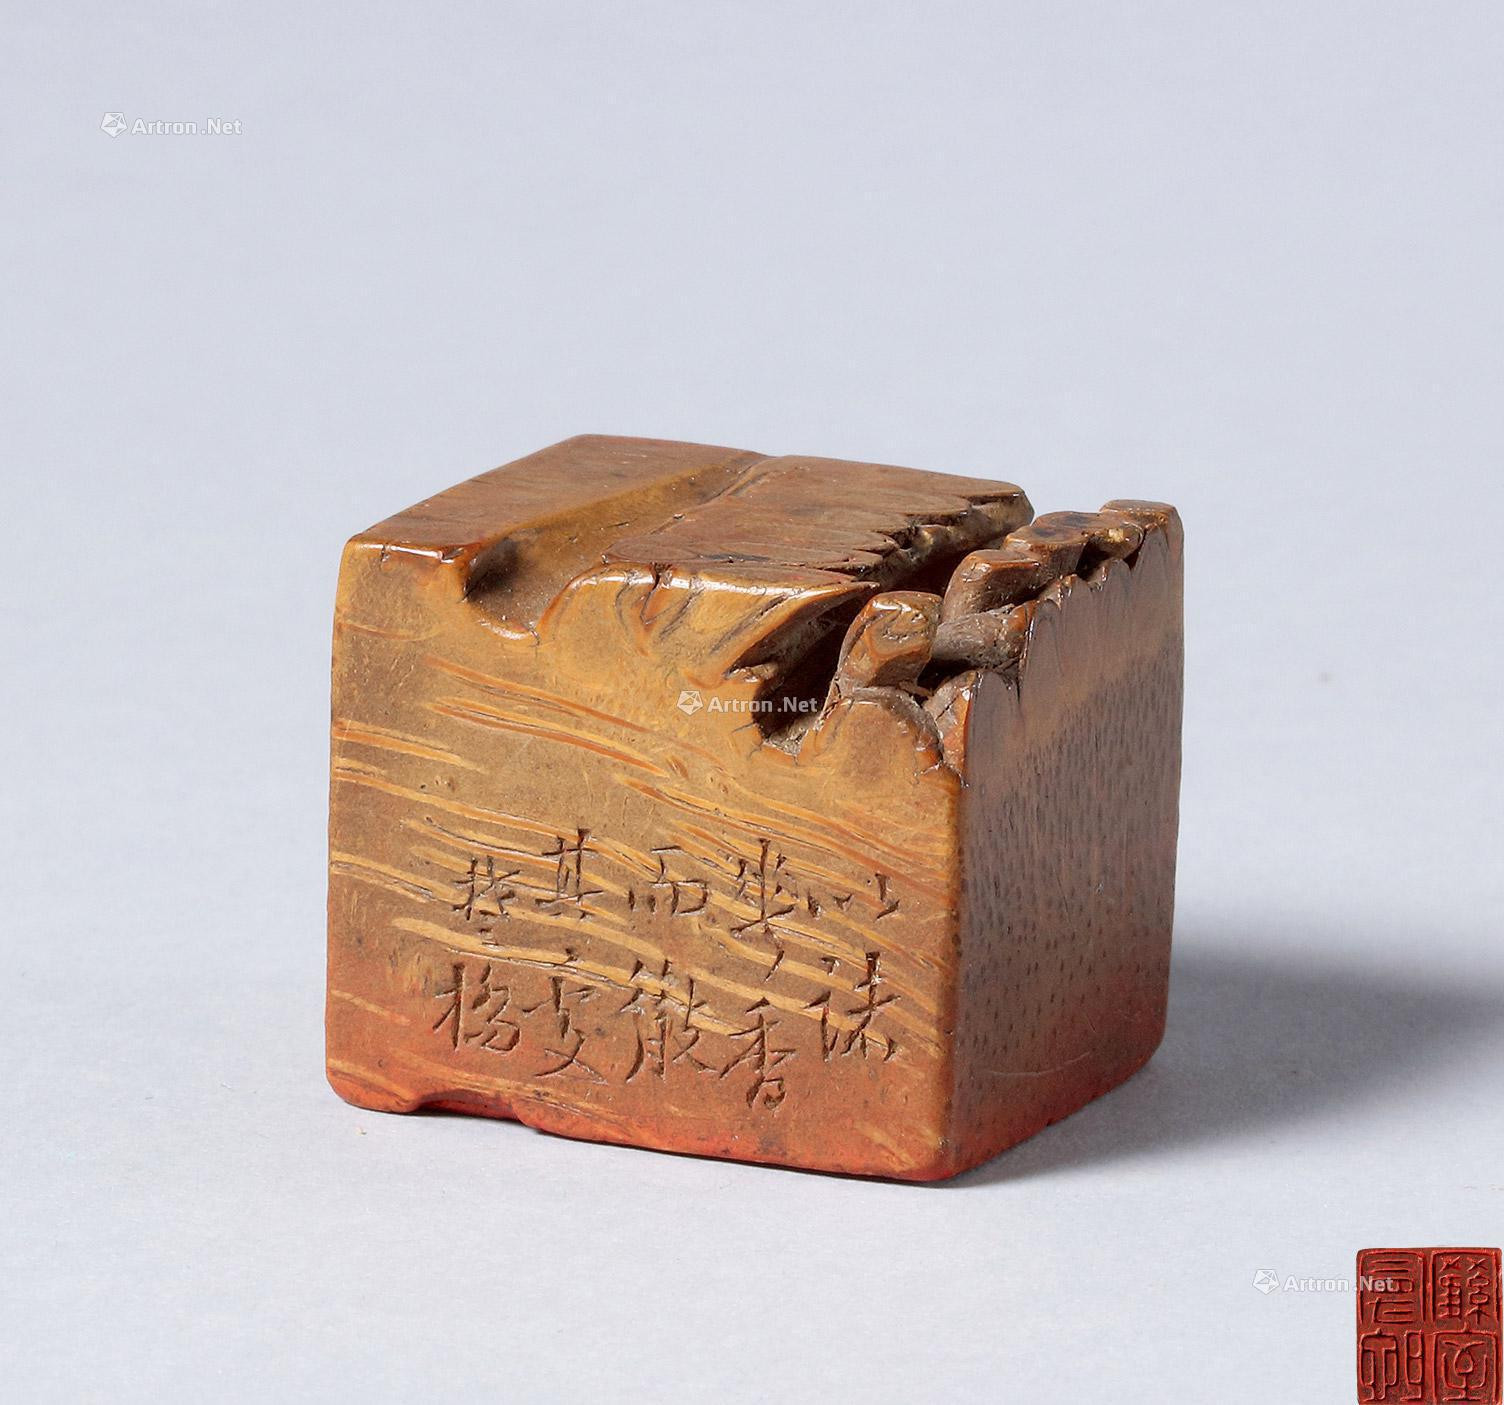 BAMBOO ROOT CARVED SQUARE SEAL